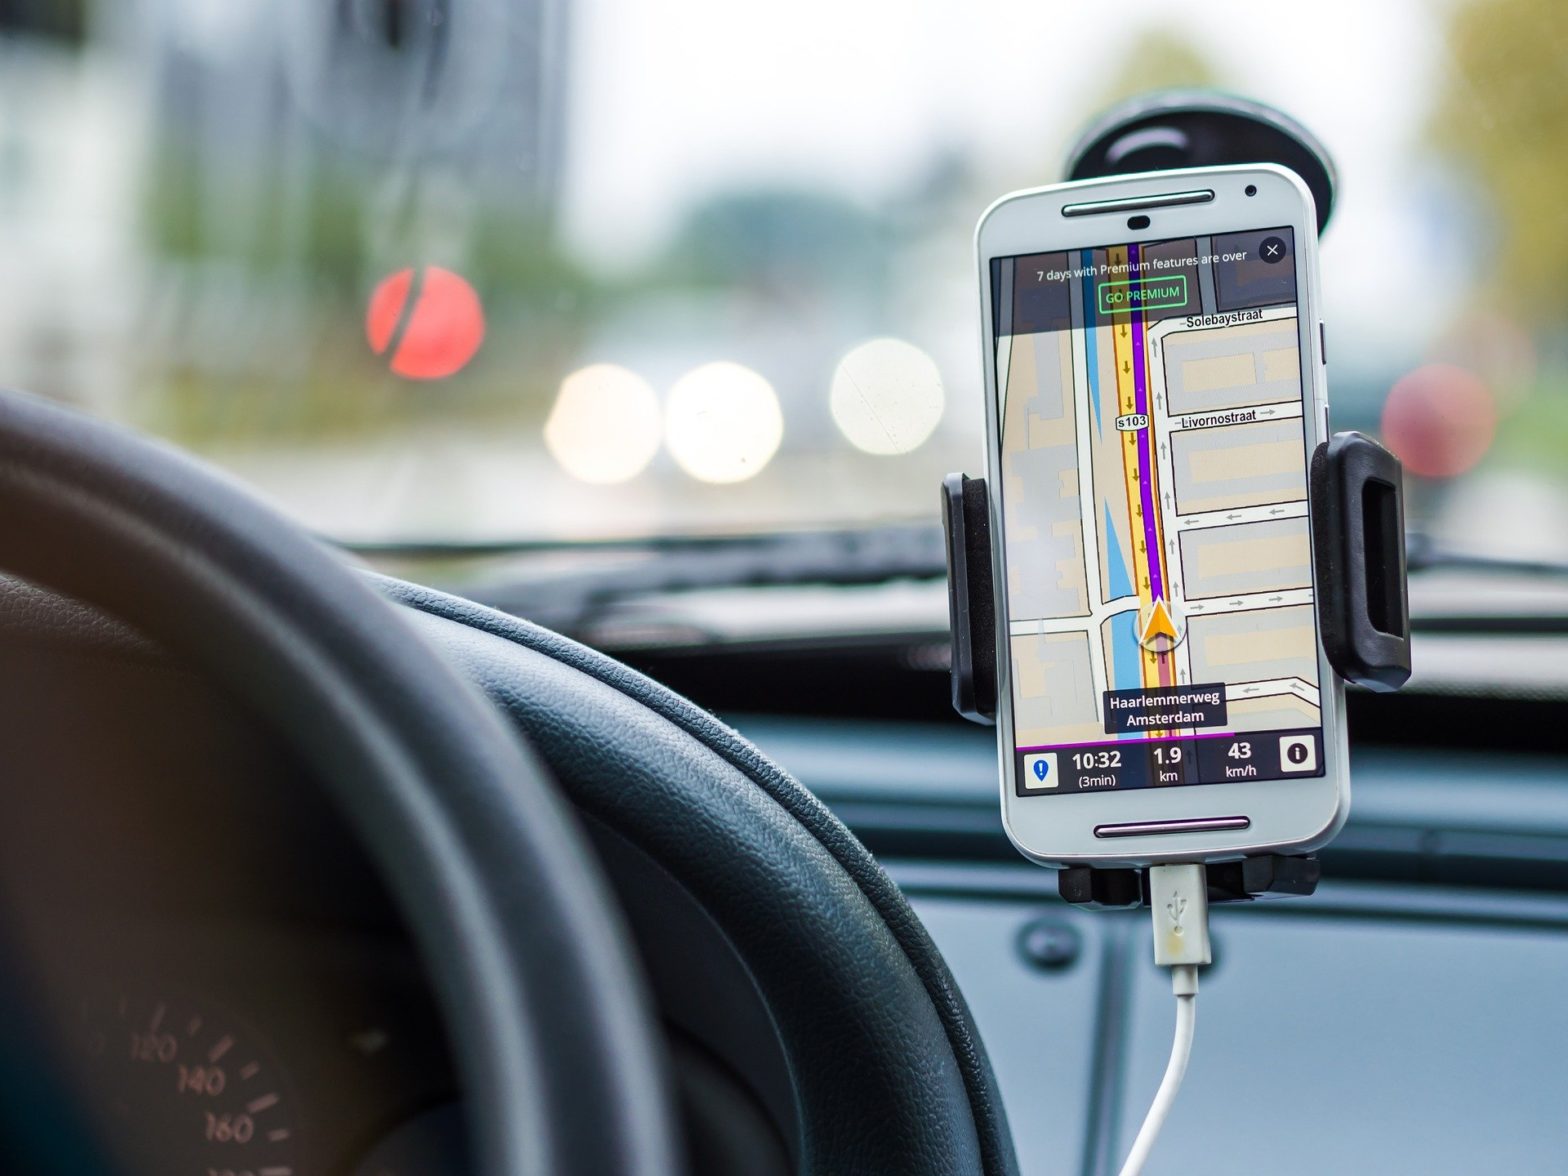 How to Set Fake GPS on iOS devices